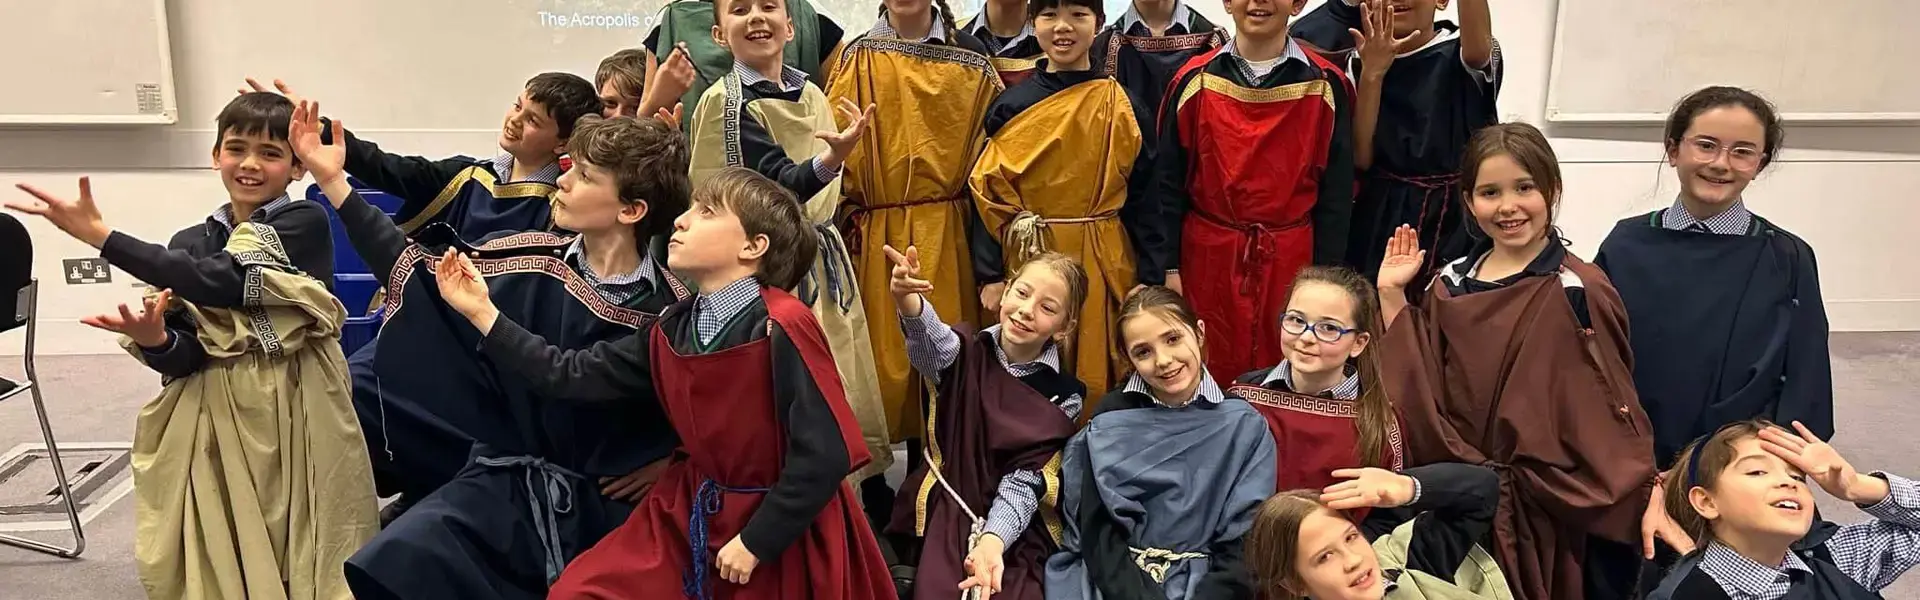 Prep 5 pupils at the British Museum wearing ancient costumes at Ibstock Place School, a private school near Richmond, Barnes, Putney, Kingston, and Wandsworth.